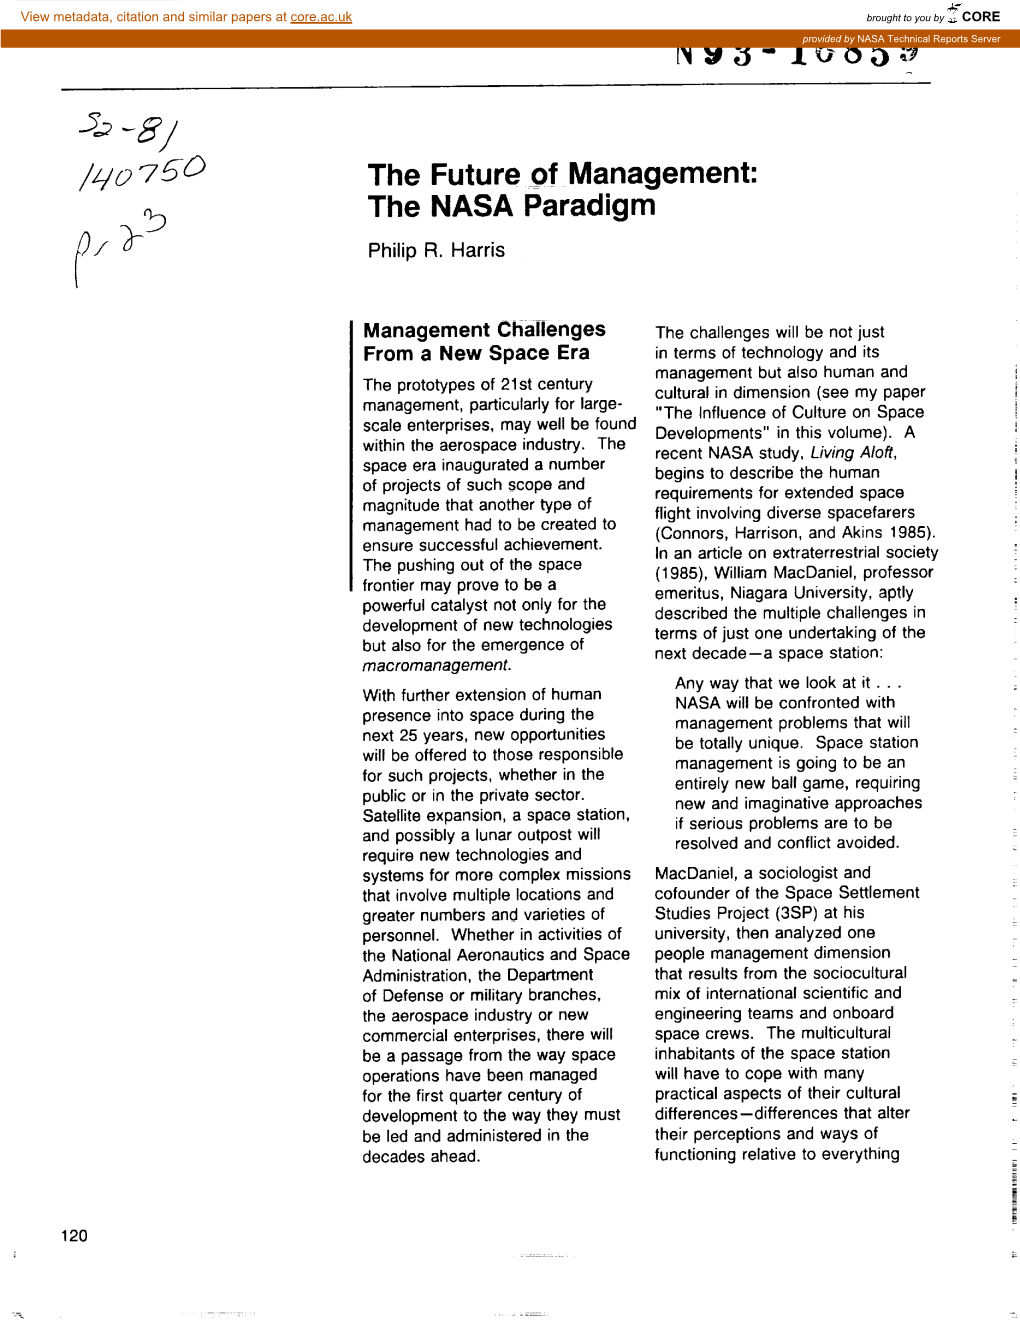 N93-1#859Provided by NASA Technical Reports Server